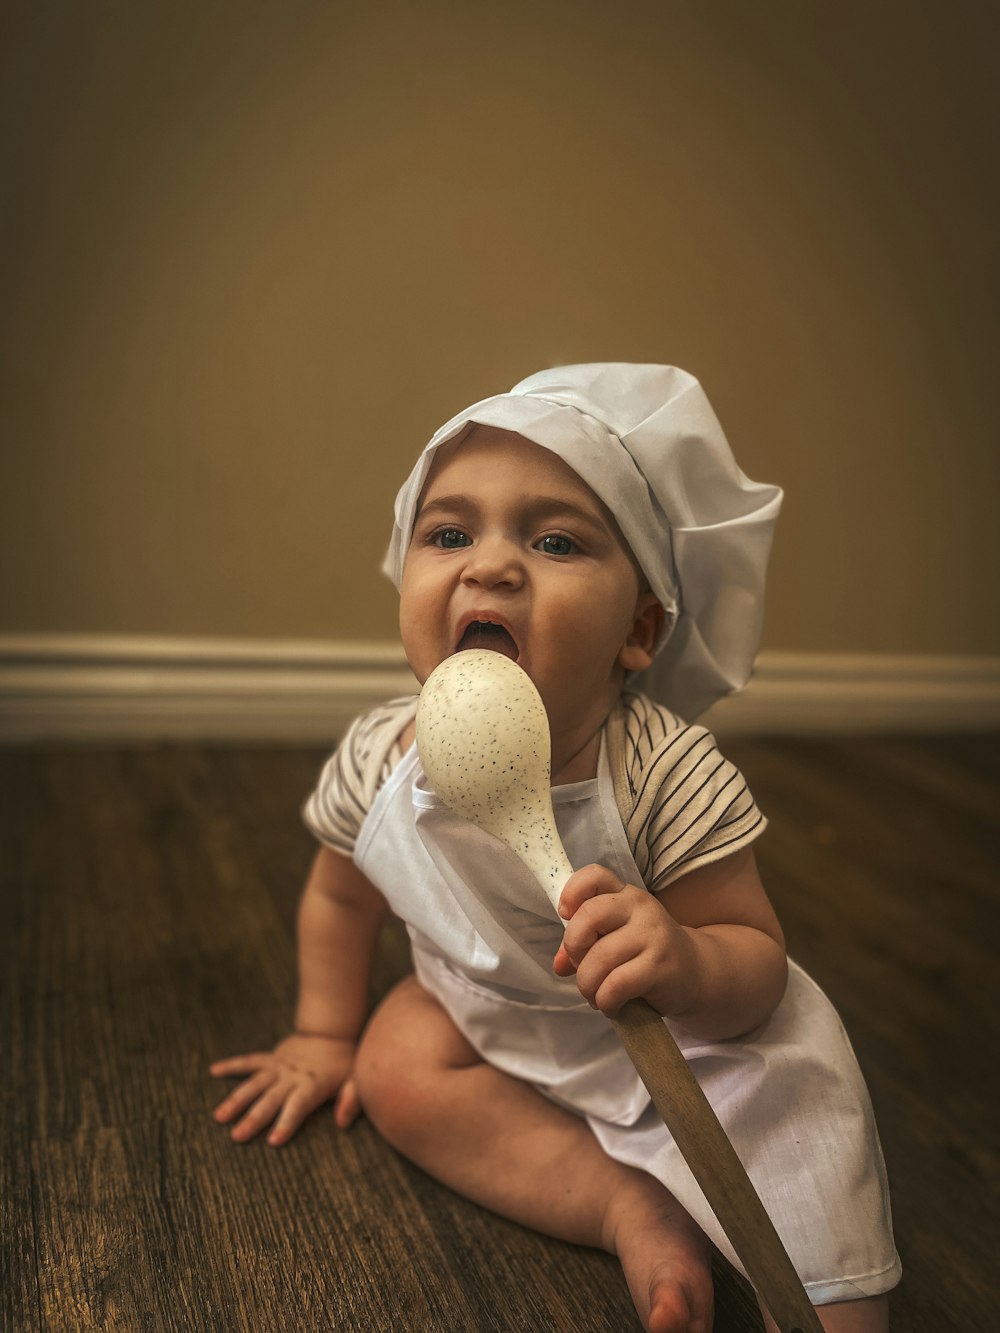 a baby sitting on the floor holding a wooden spoon